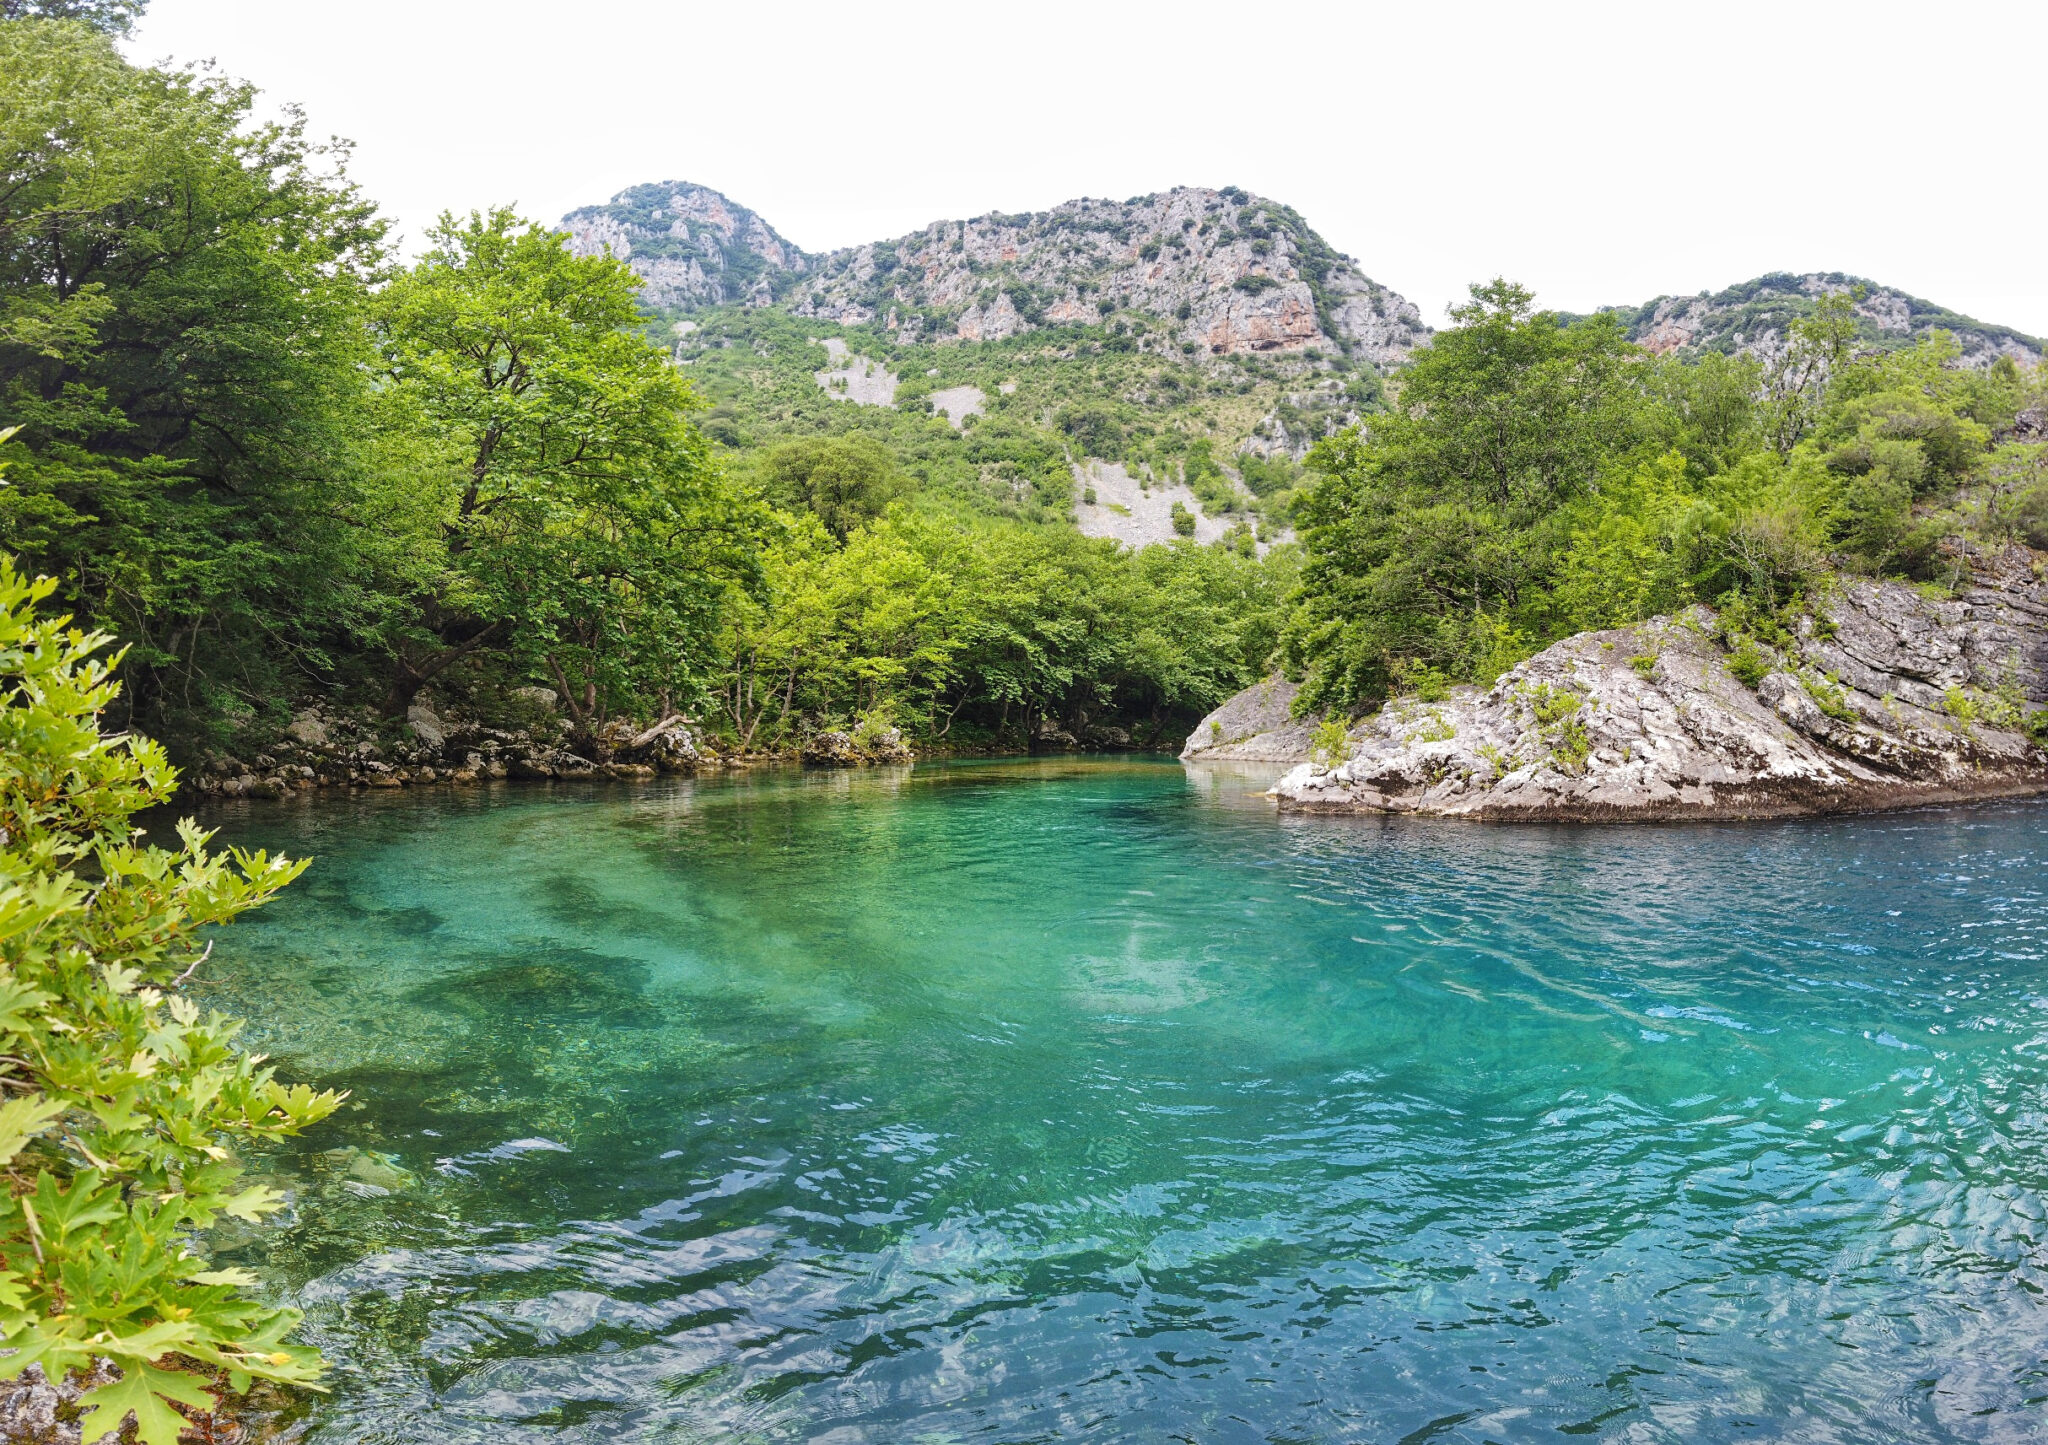 Voidomatis River, ideal for rafting and refreshing swims